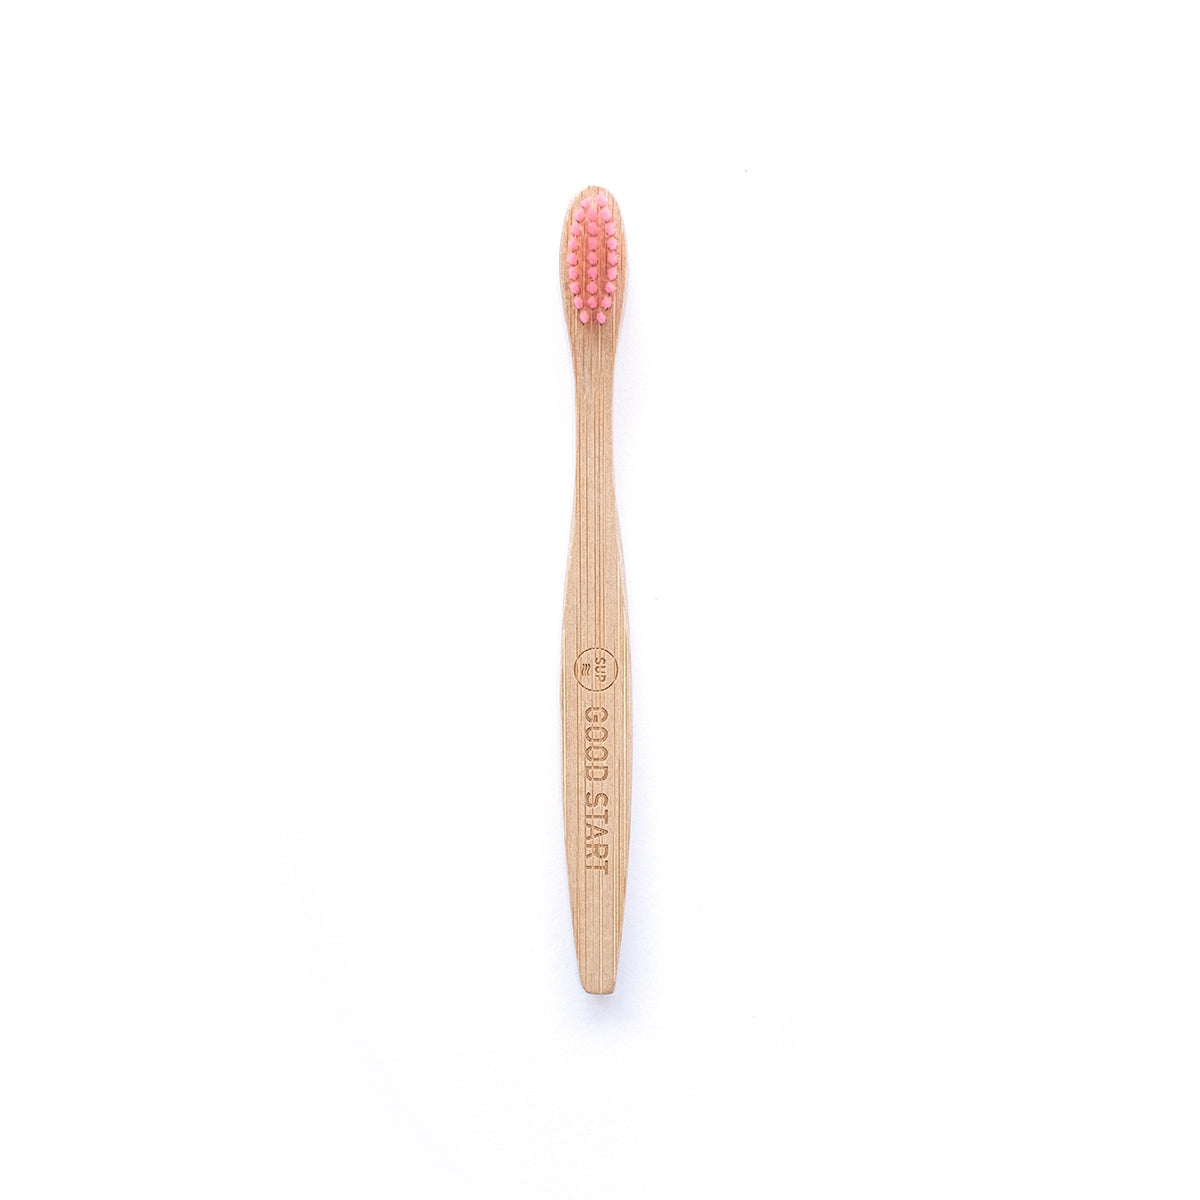 Ecological Toothbrush - Girls and boys